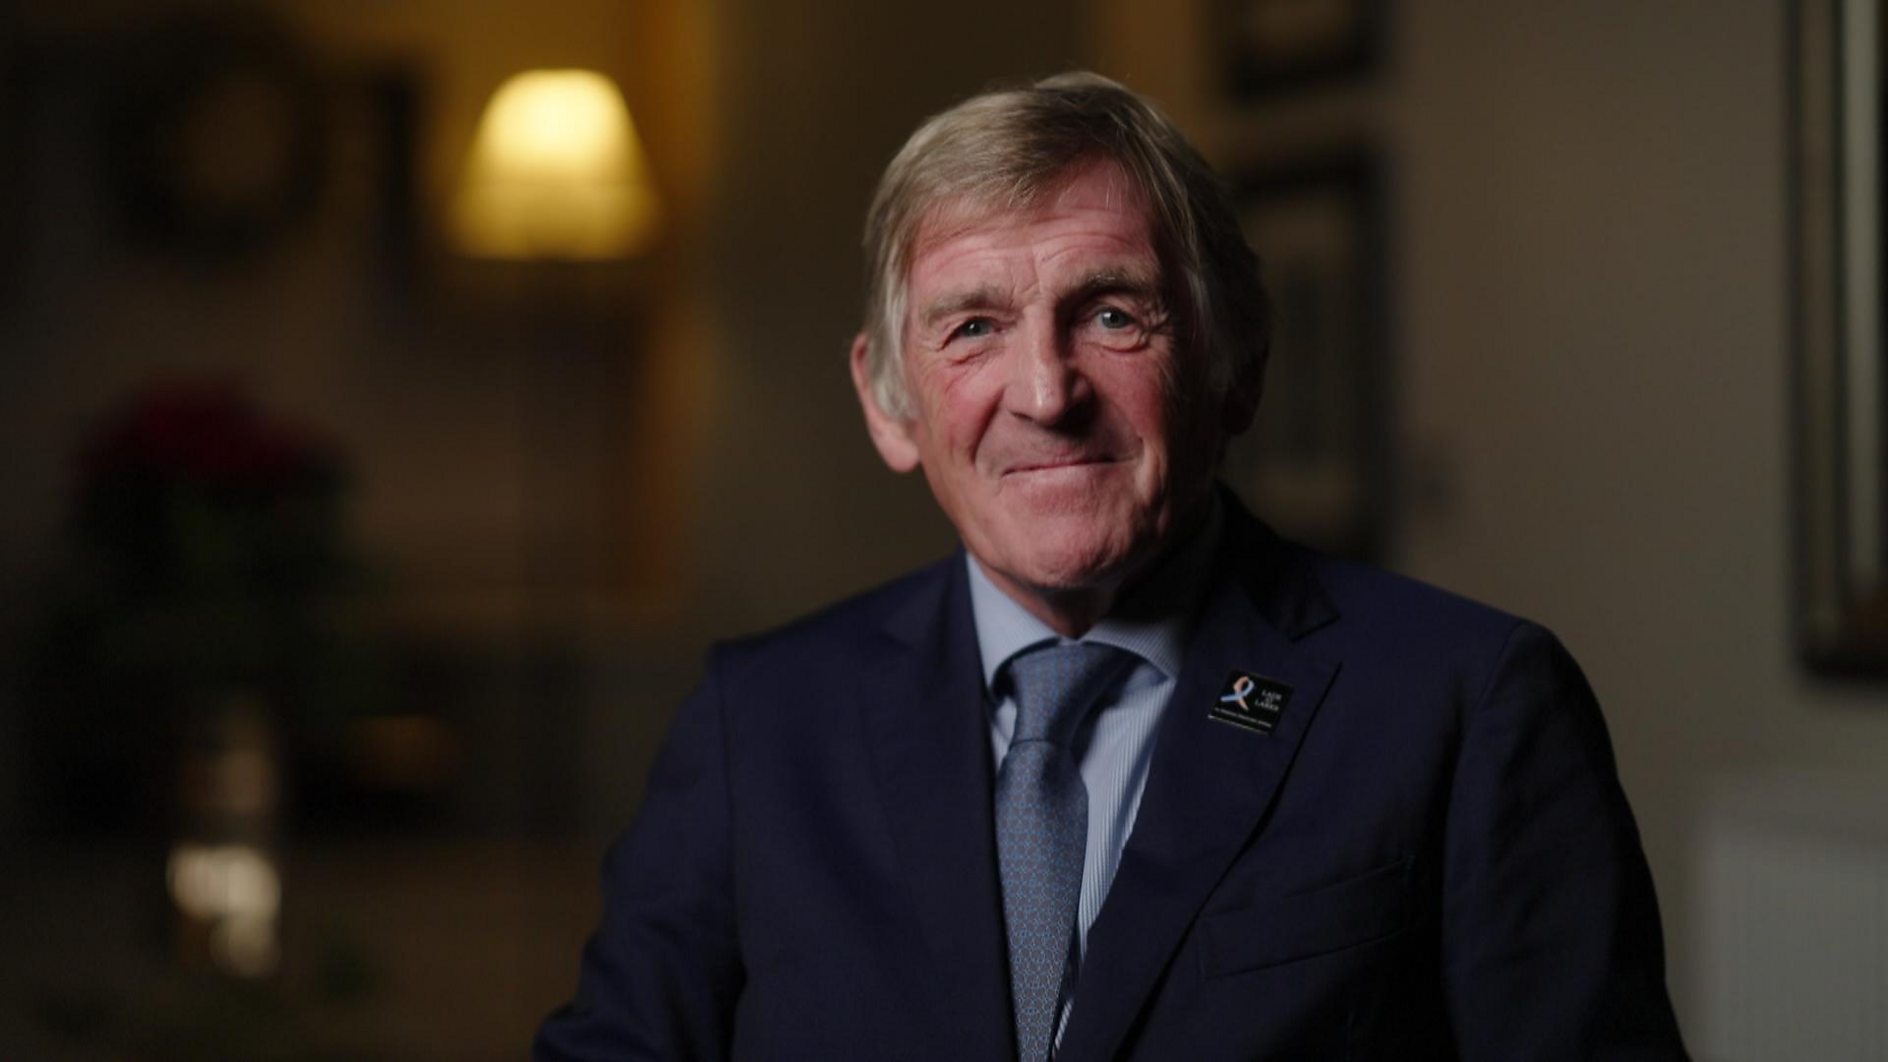 Sir Kenny Dalglish to receive Lifetime Achievement award at BBC Sports Personality of the Year 2023